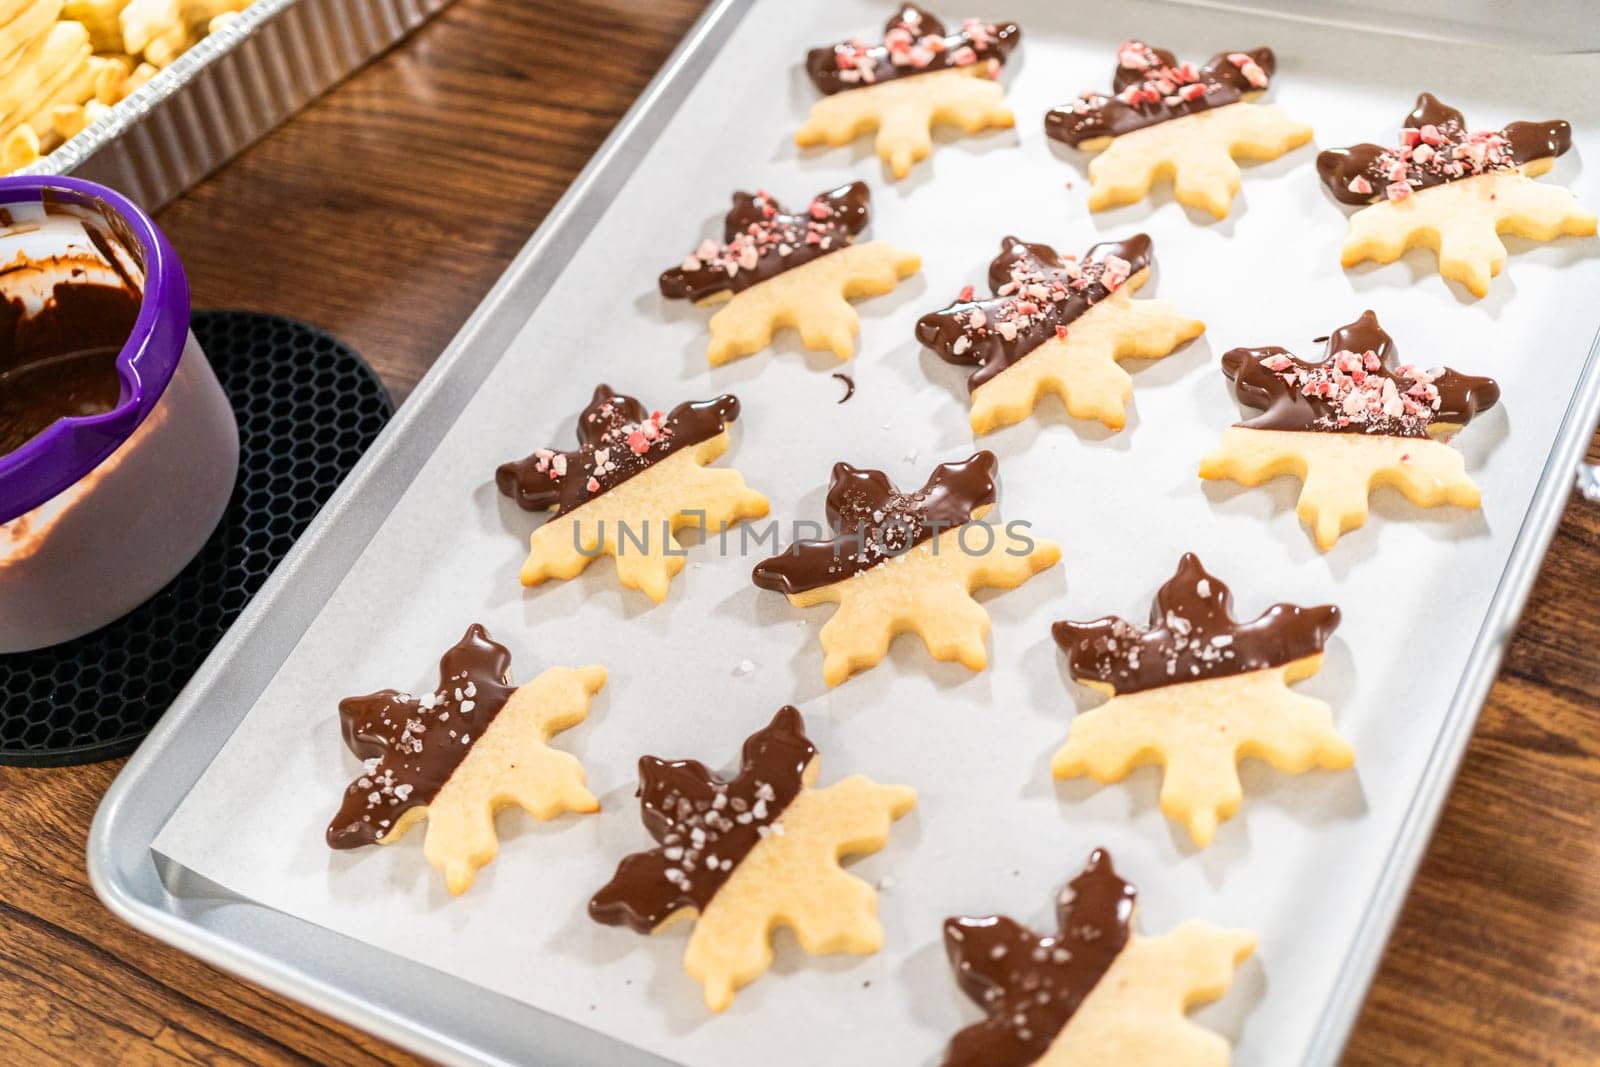 Making Star-Shaped Cookies with Chocolate and Peppermint Chips by arinahabich